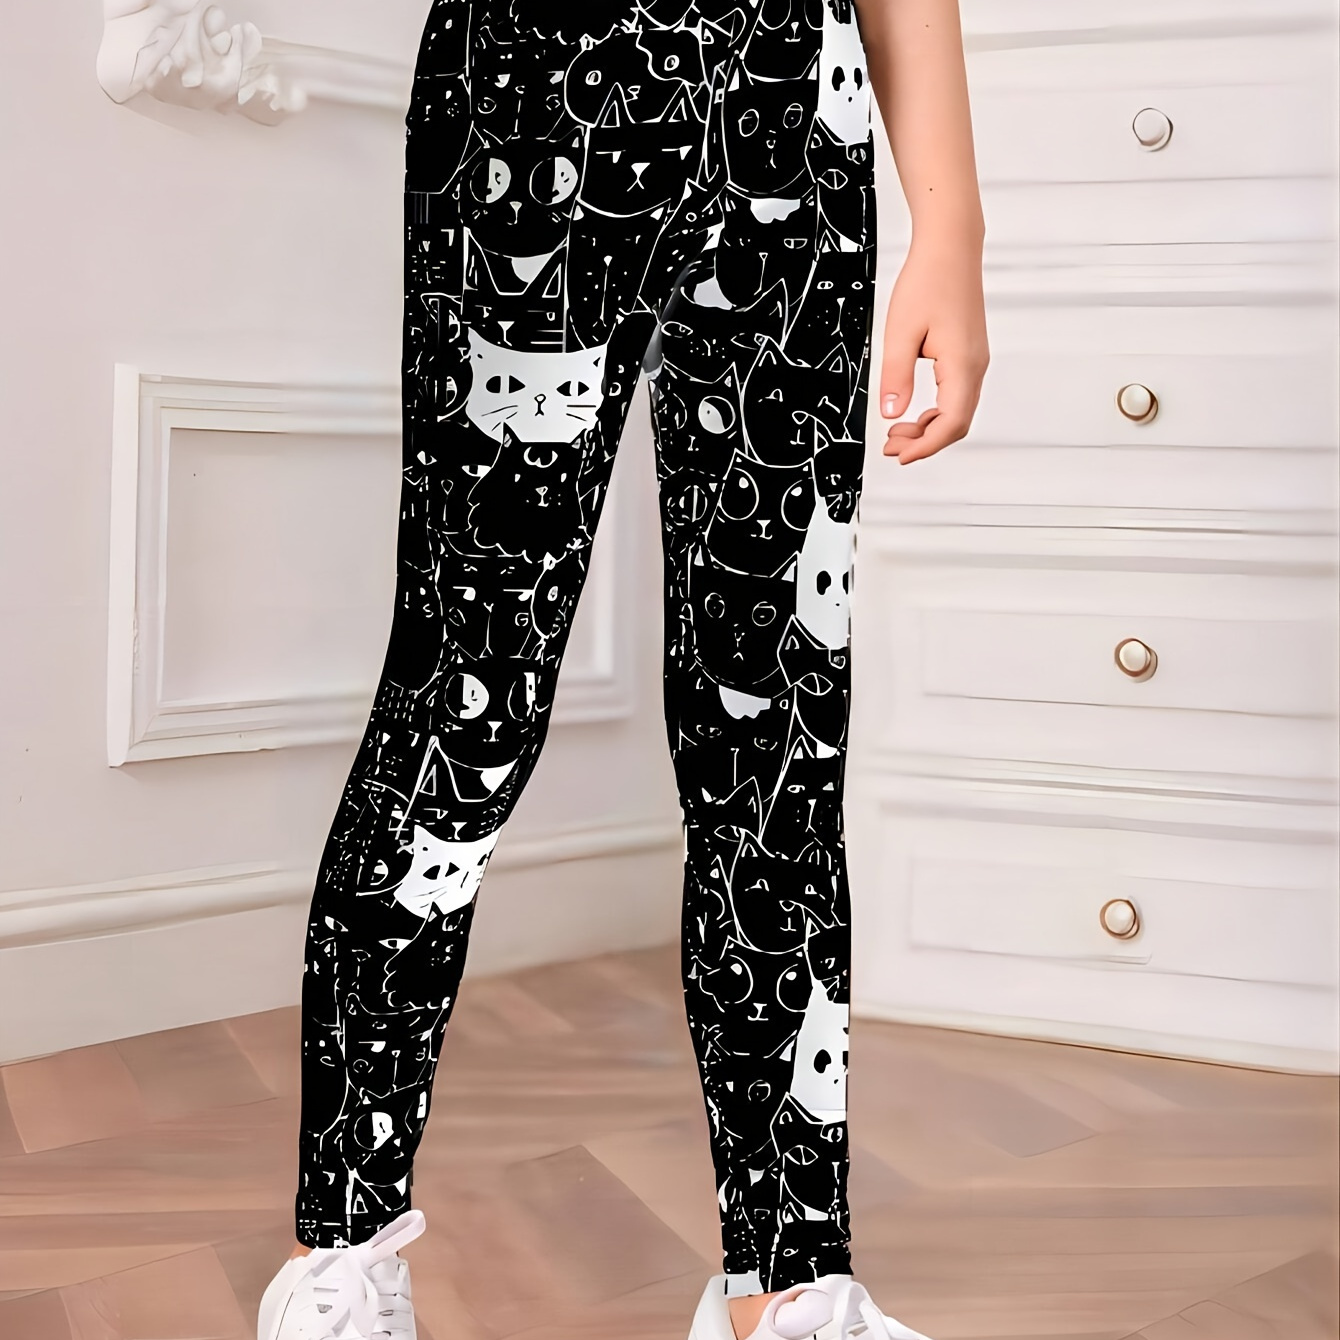 

Girls High Stretchy Cartoon Cat Graphic Tummy Control Leggings Tight Pants For Sports Yoga